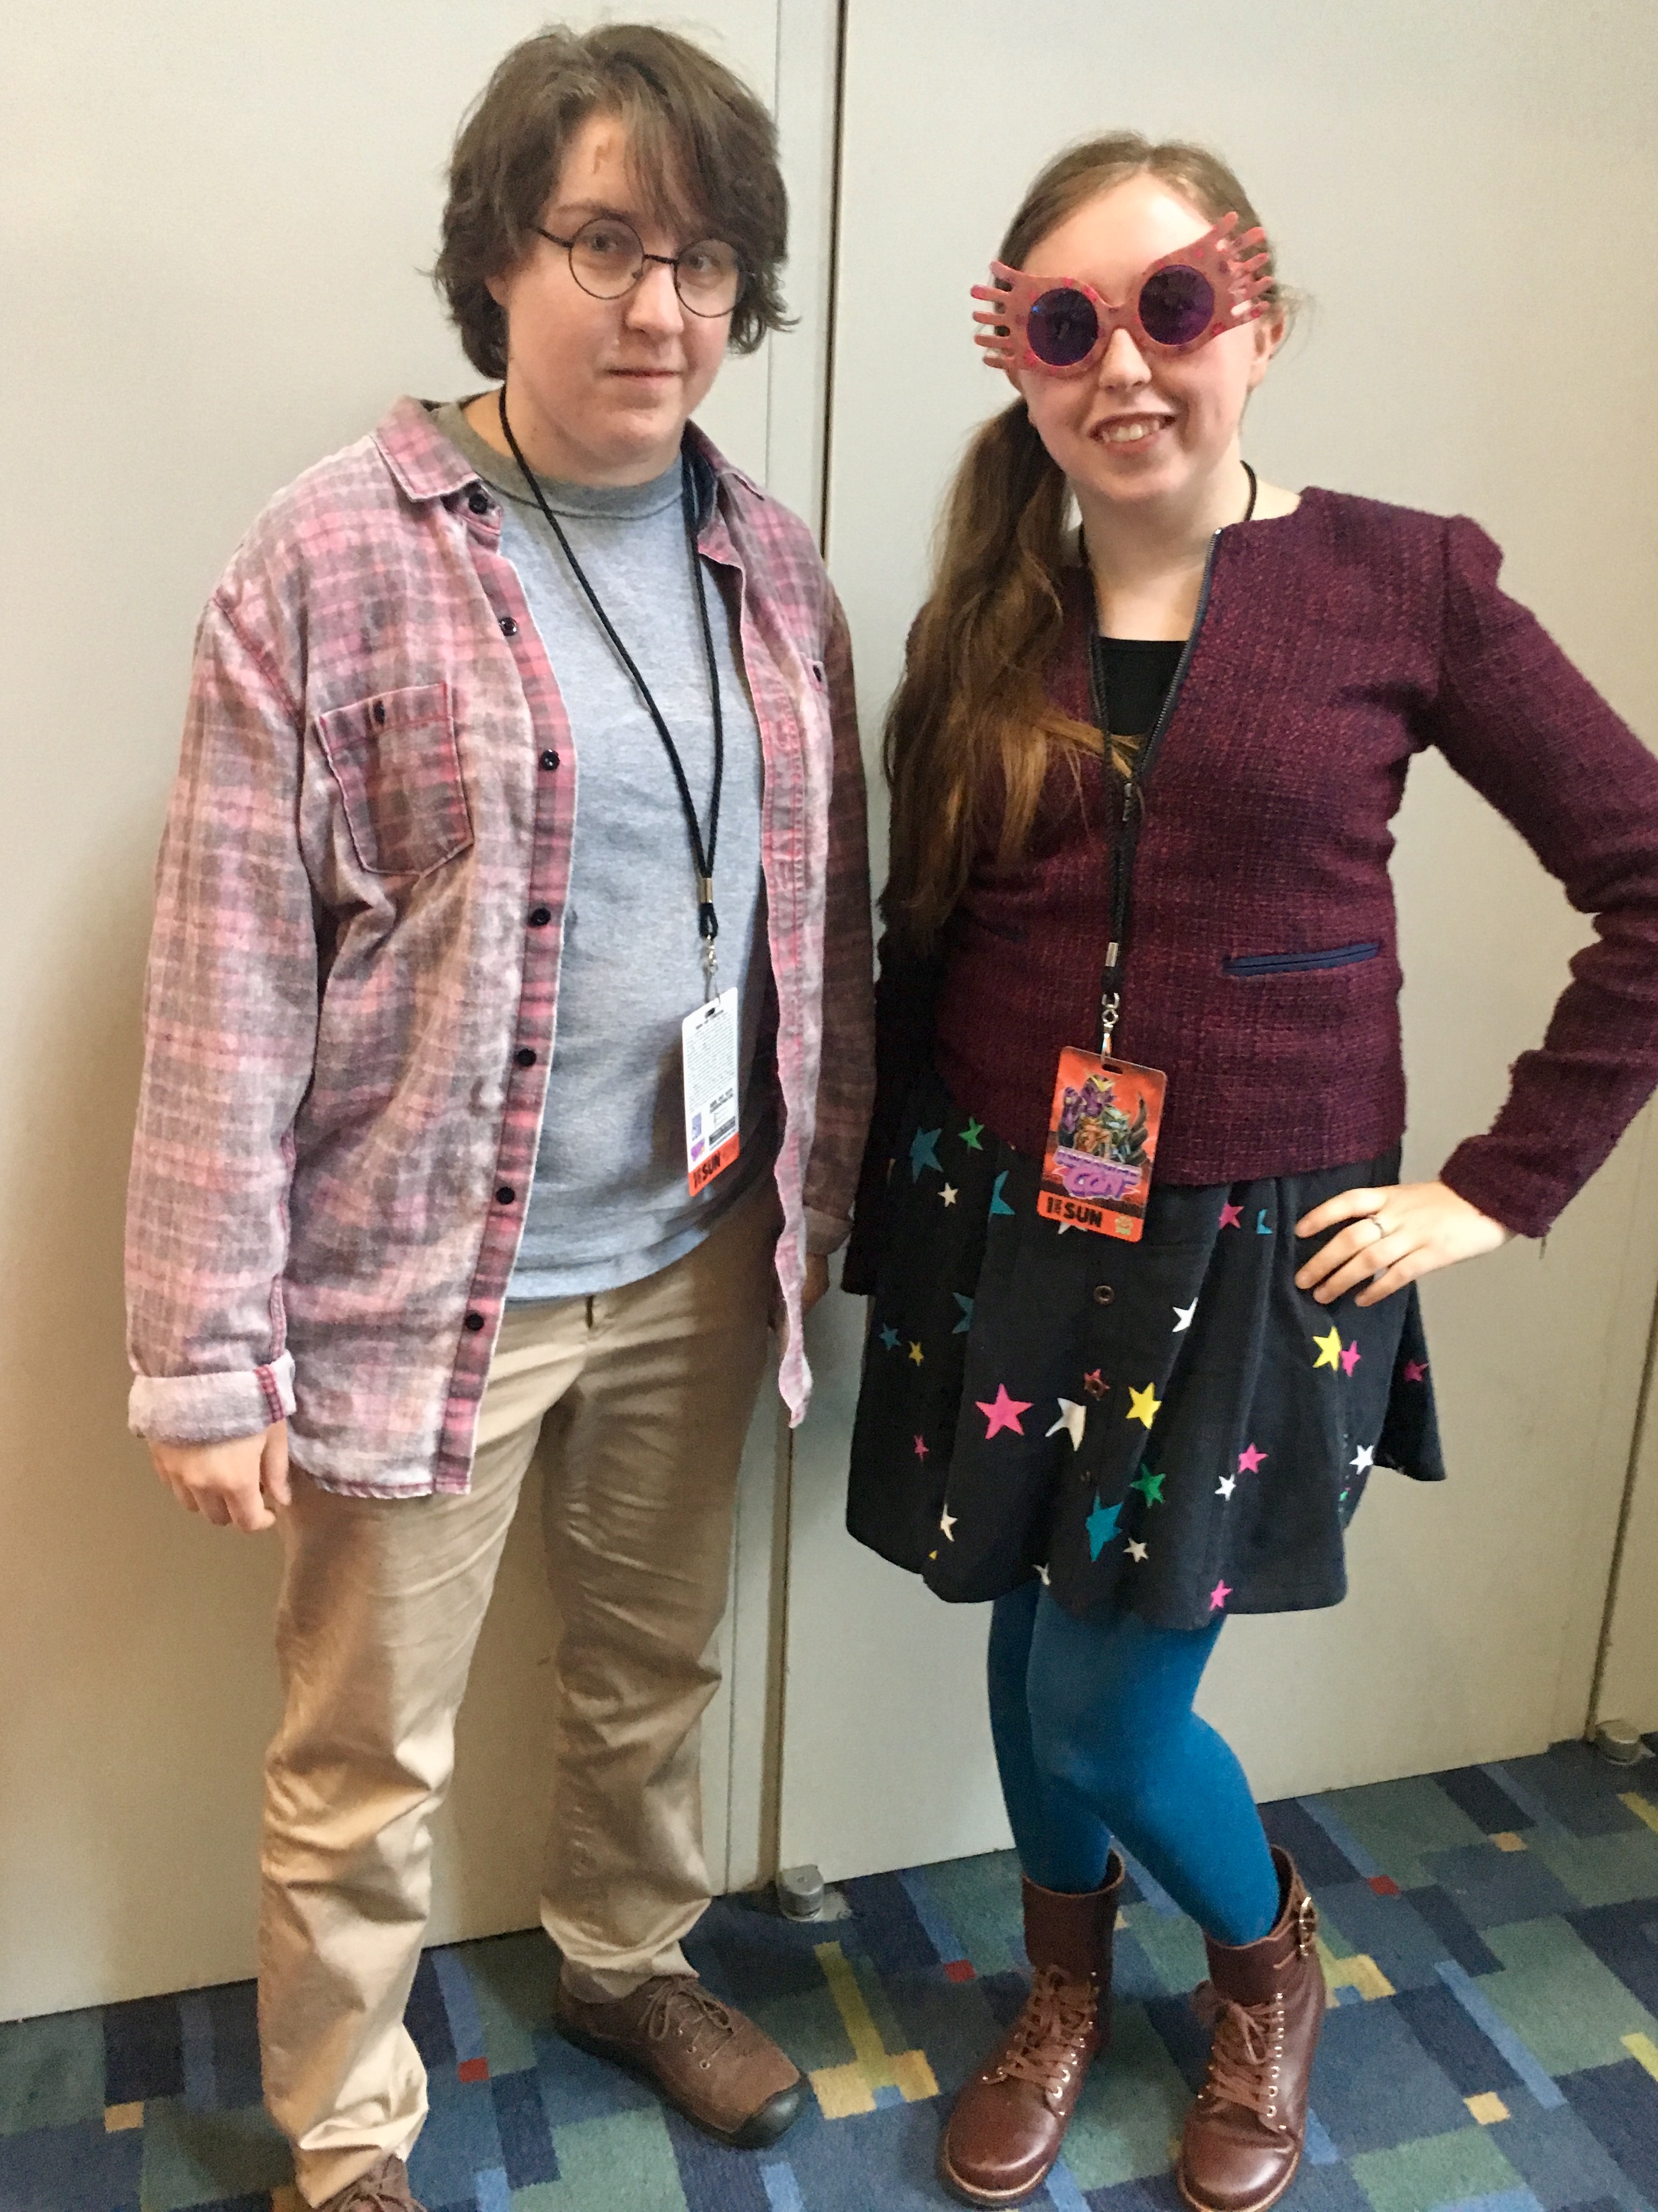 A lightning-scarred Harry with Luna Lovegood, who is rocking some amazing Spectrespecs